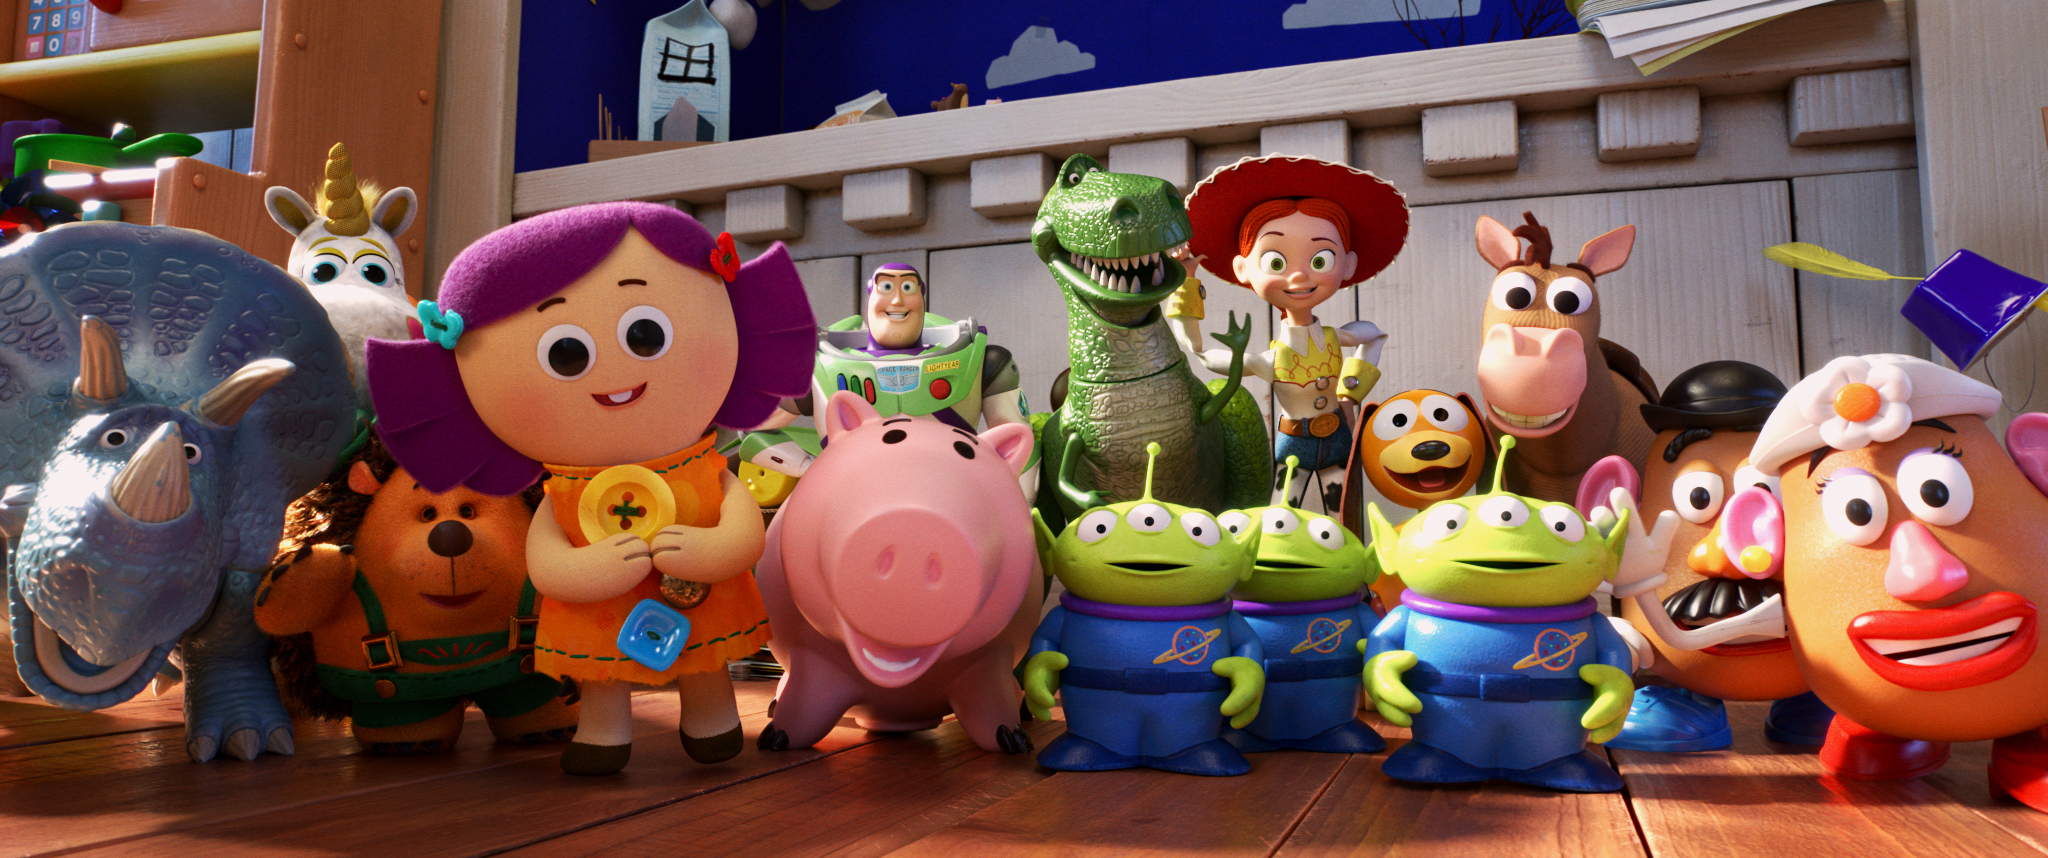 Bonnie  Toy story 3, Toy story, Toy story characters